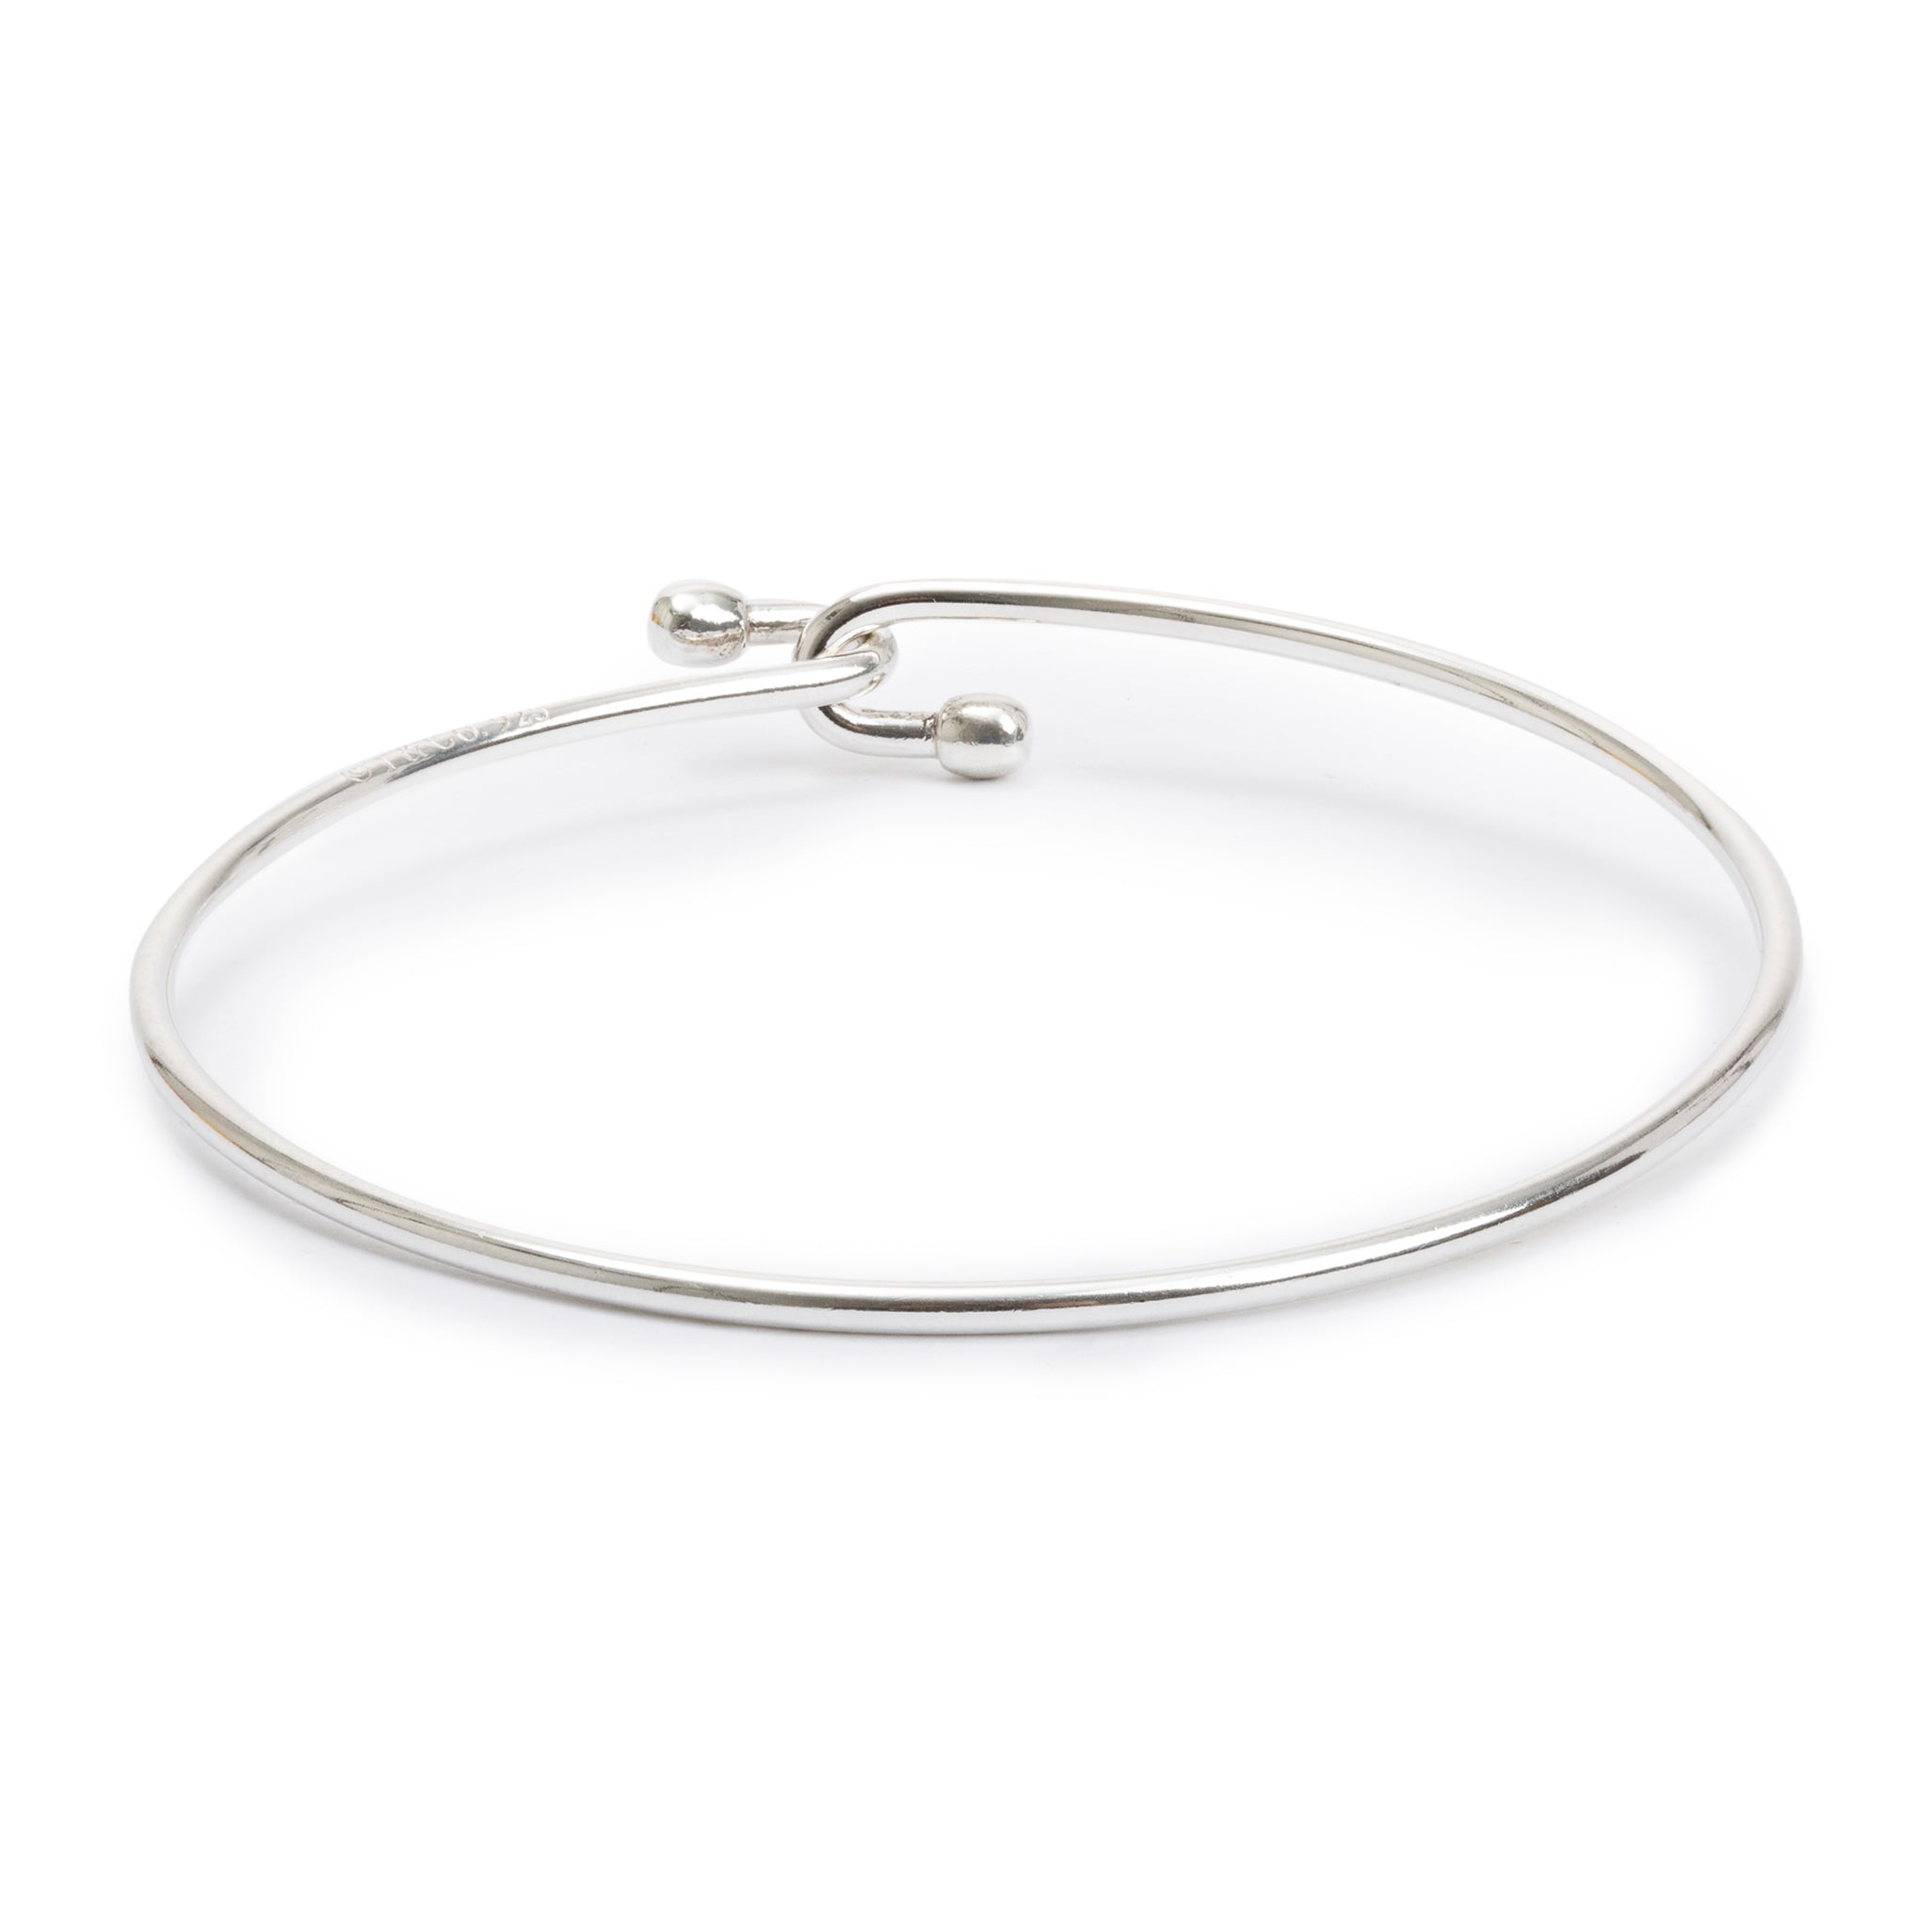 Tiffany & Co. Sterling Silver Wire Hook Bangle